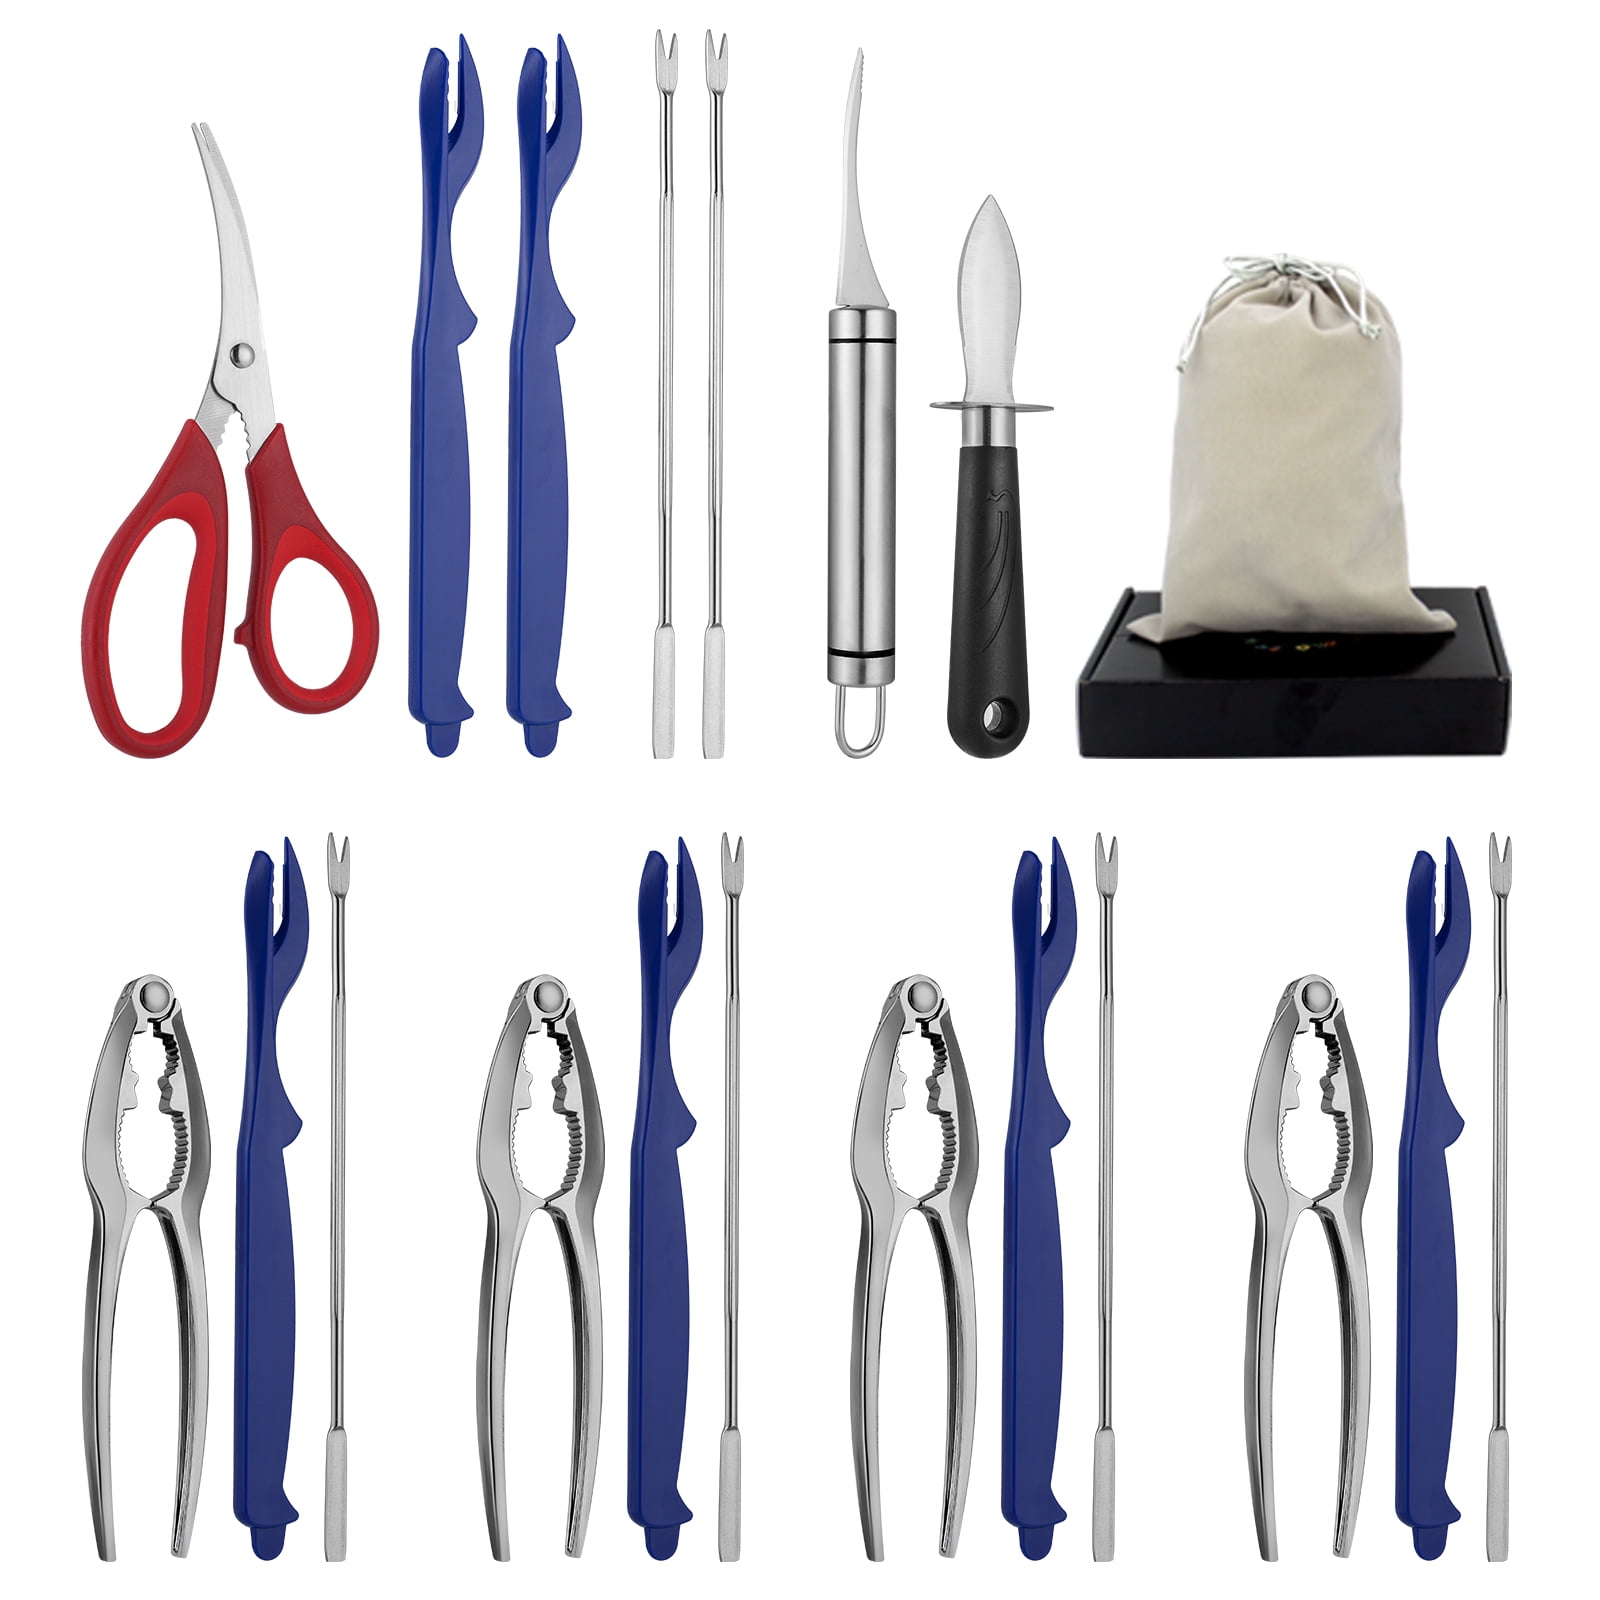 Seafood Tools Set Includes 4 Crab Crackers 6 Seafood Fork 6